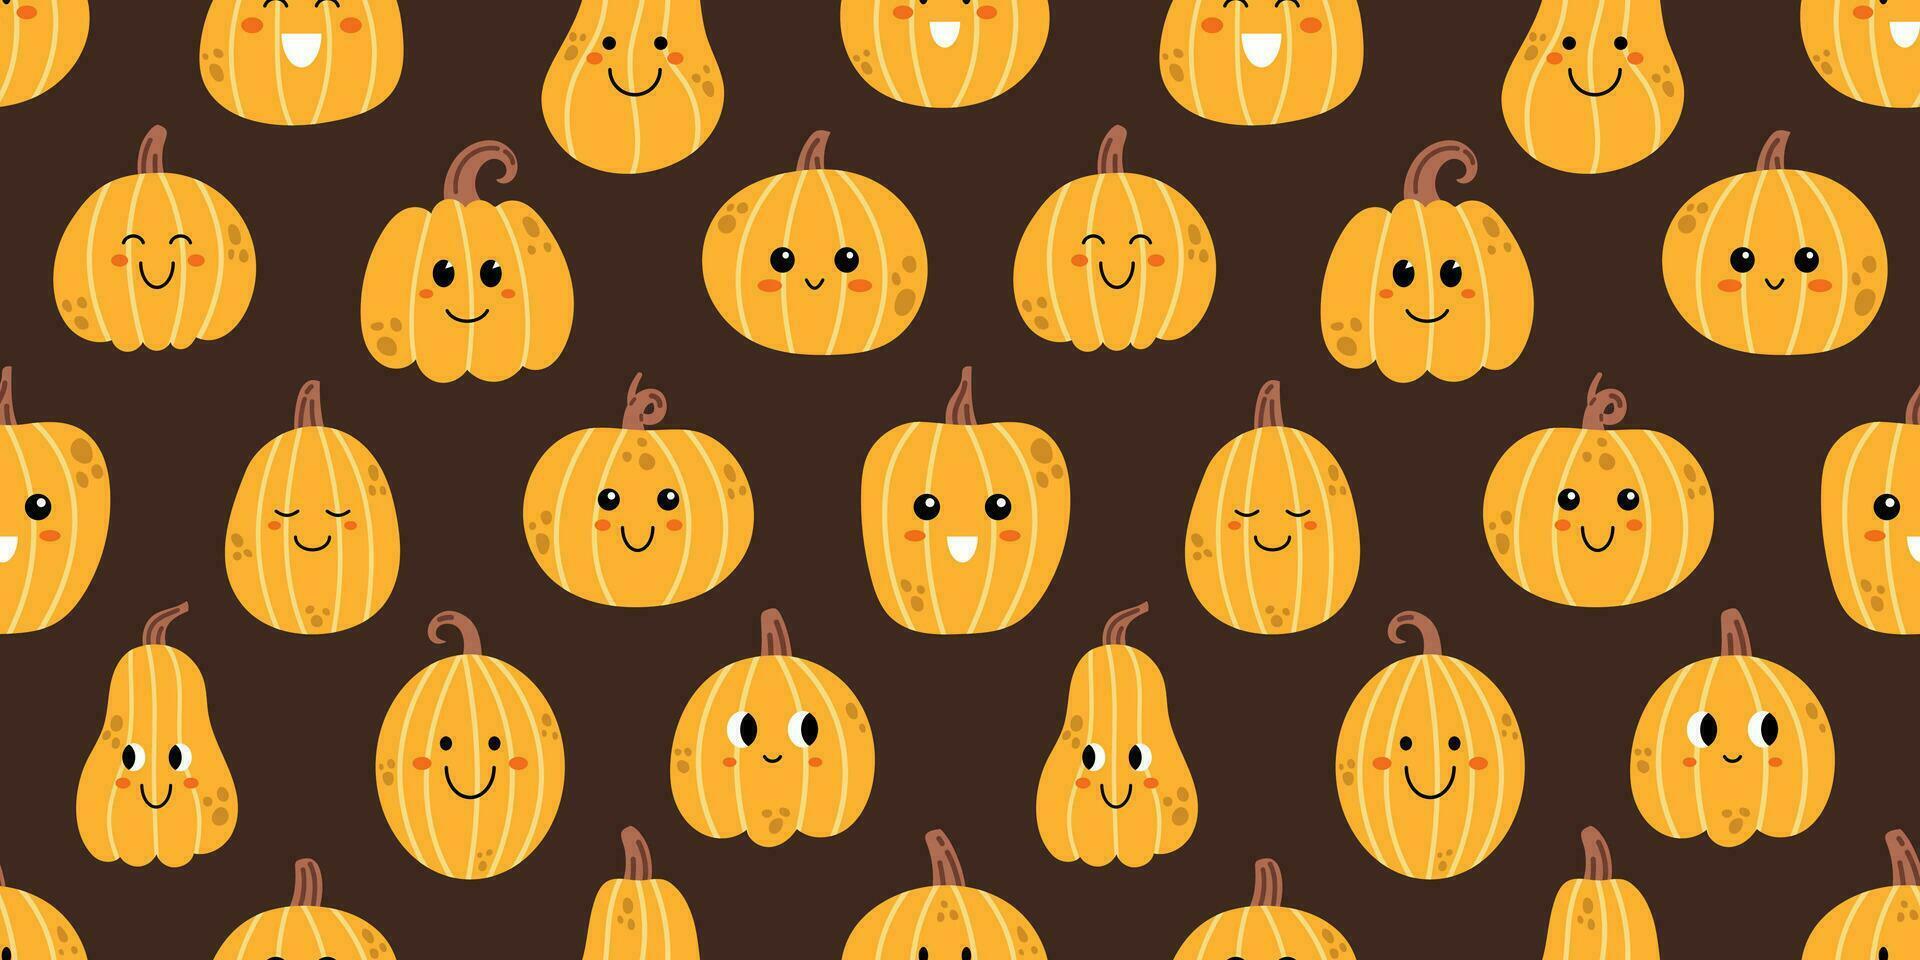 A pattern of pumpkins with faces on a brown background - Halloween desktop, cute fall